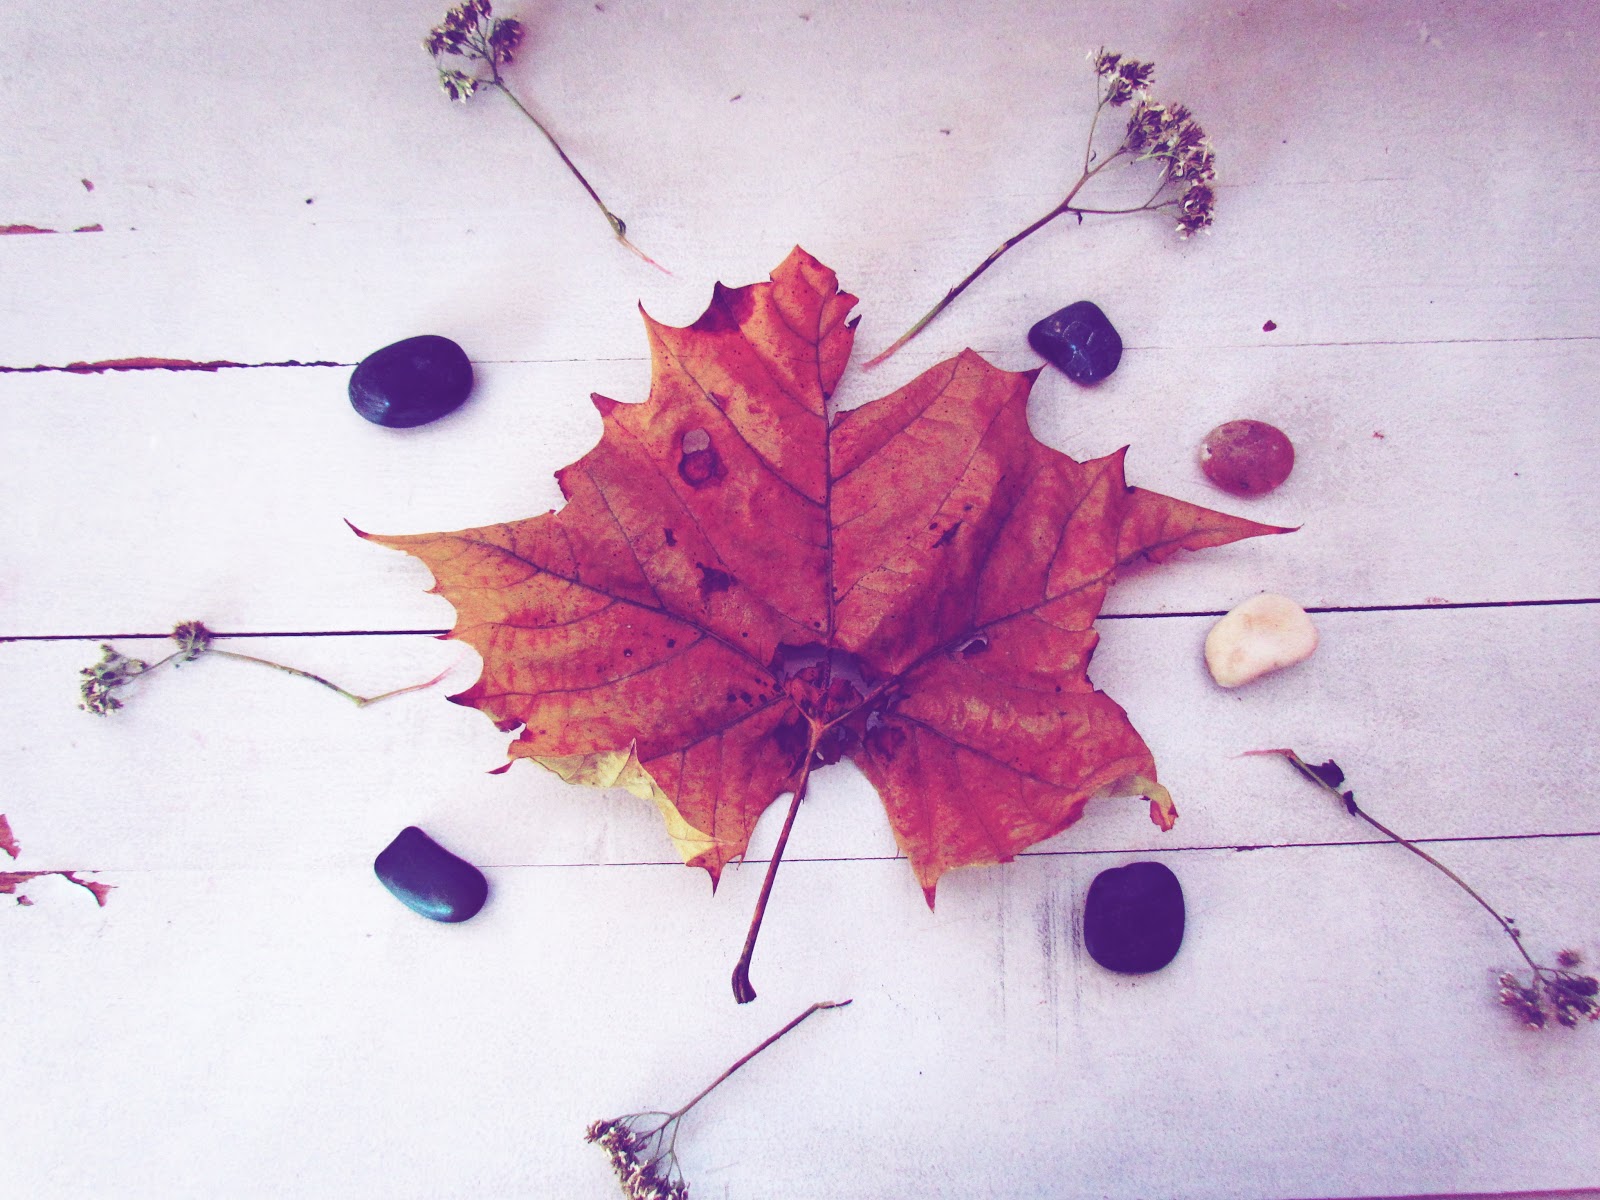 Nature Art Flat Lay With Autumn Leaves, Rocks, and Pinecones